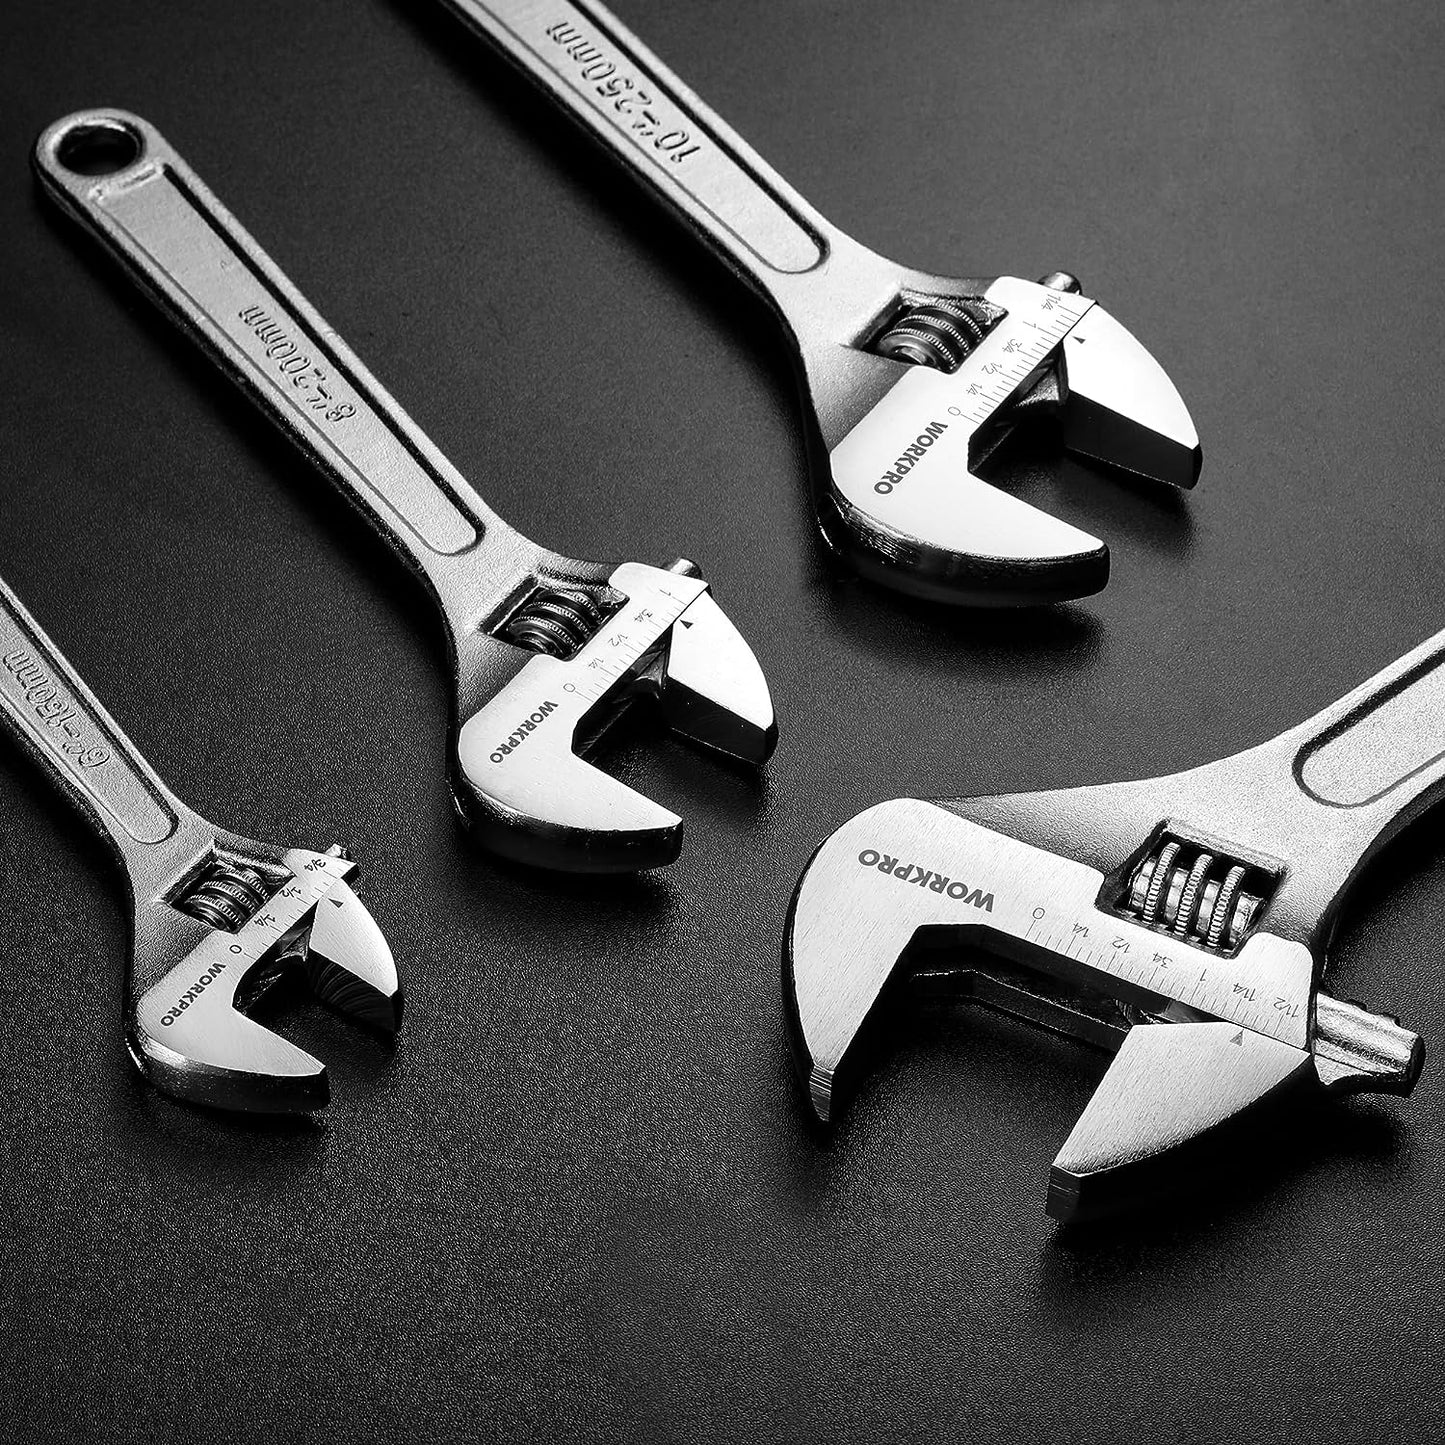 4-piece Adjustable Wrench Set Chrome-plated (6-inch, 8-inch, 10-inch, 12-inch)